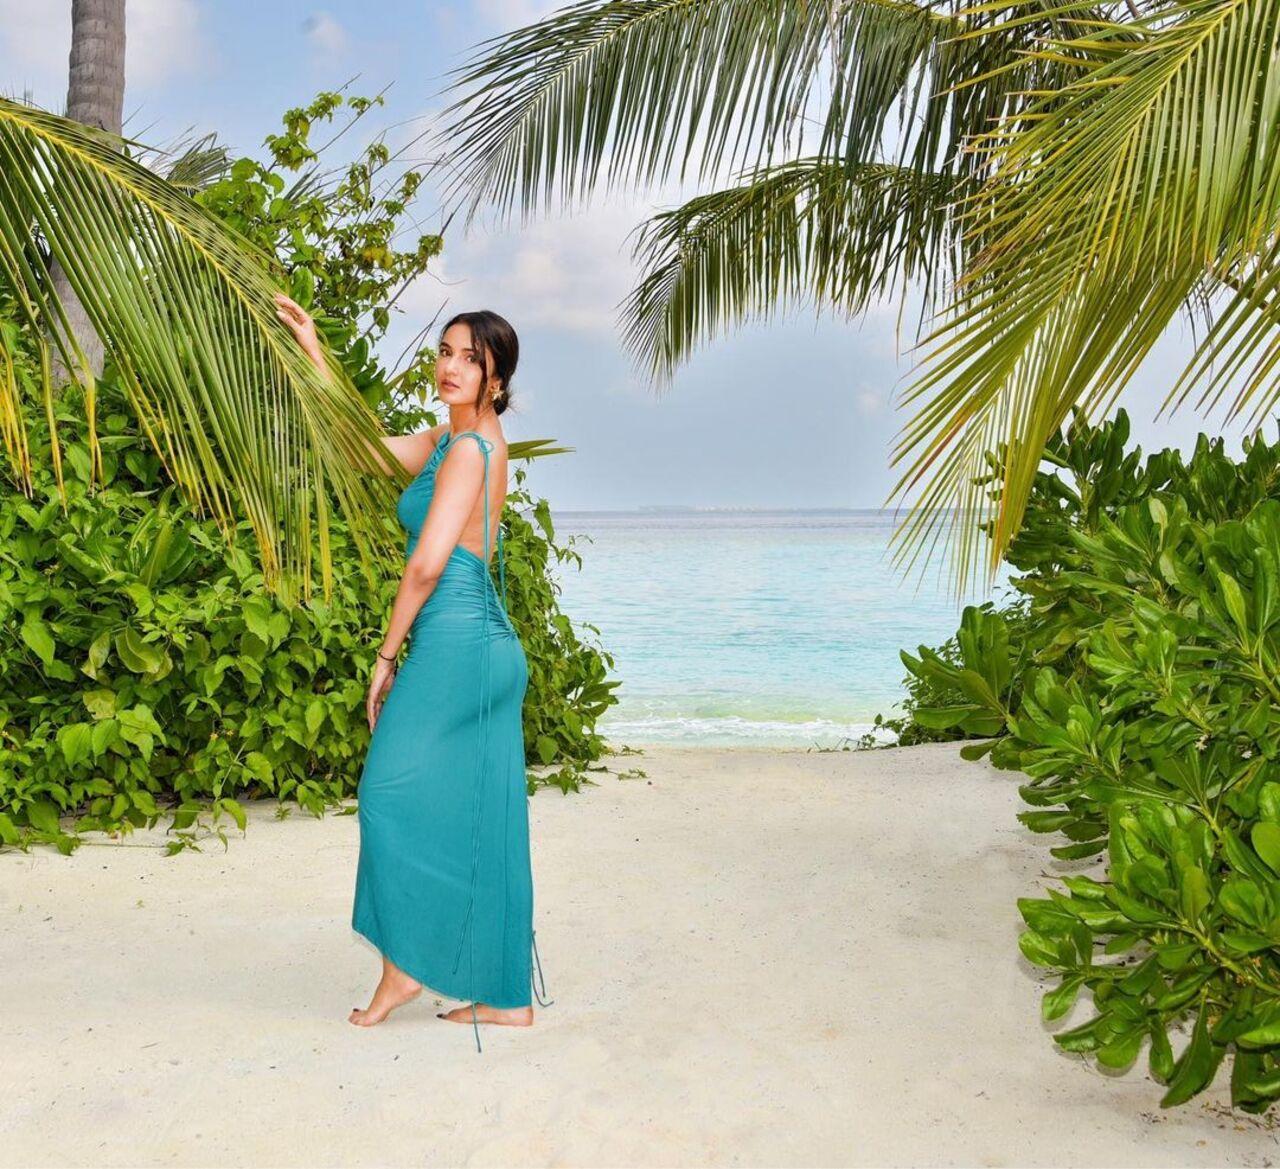 Taken against a beautiful backdrop, the picture is from Jasmine's vacation to the Maldives